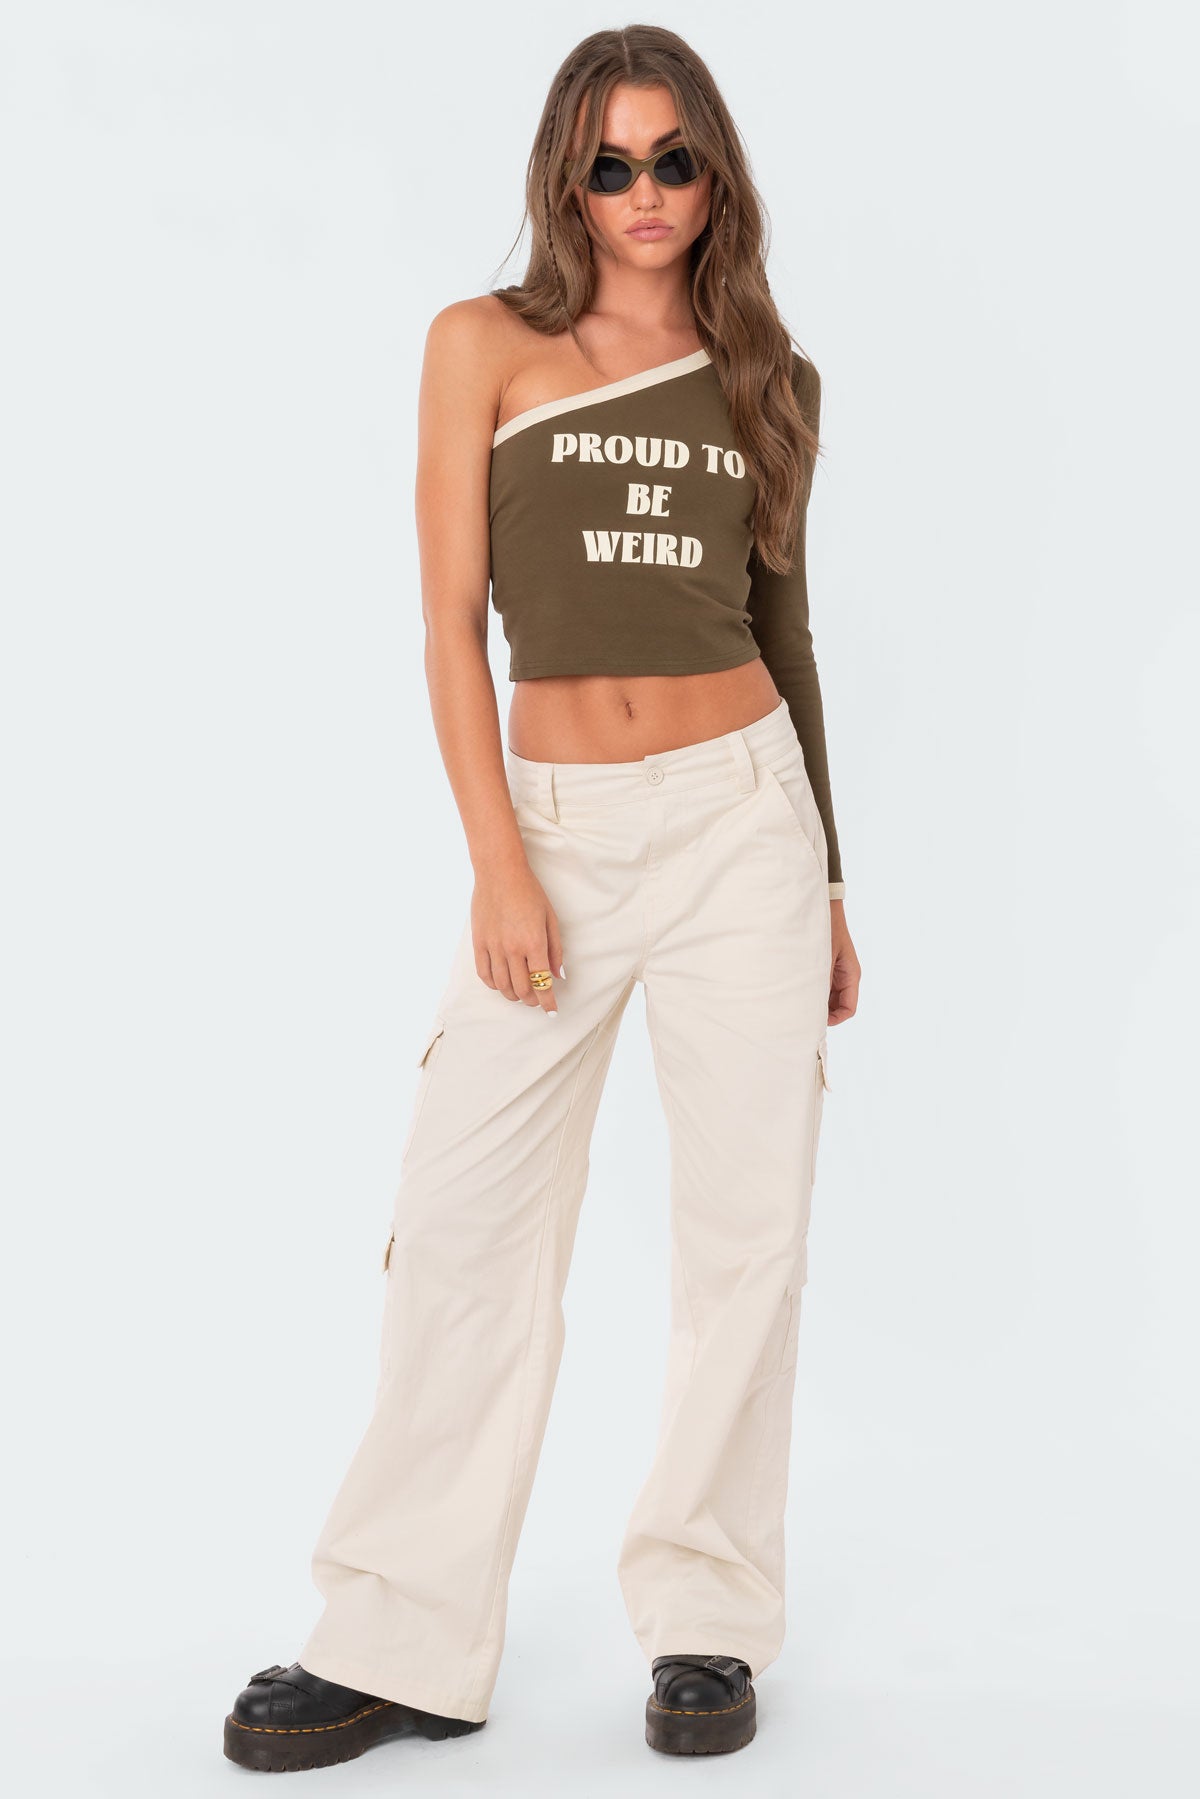 Nyra One Shoulder Top